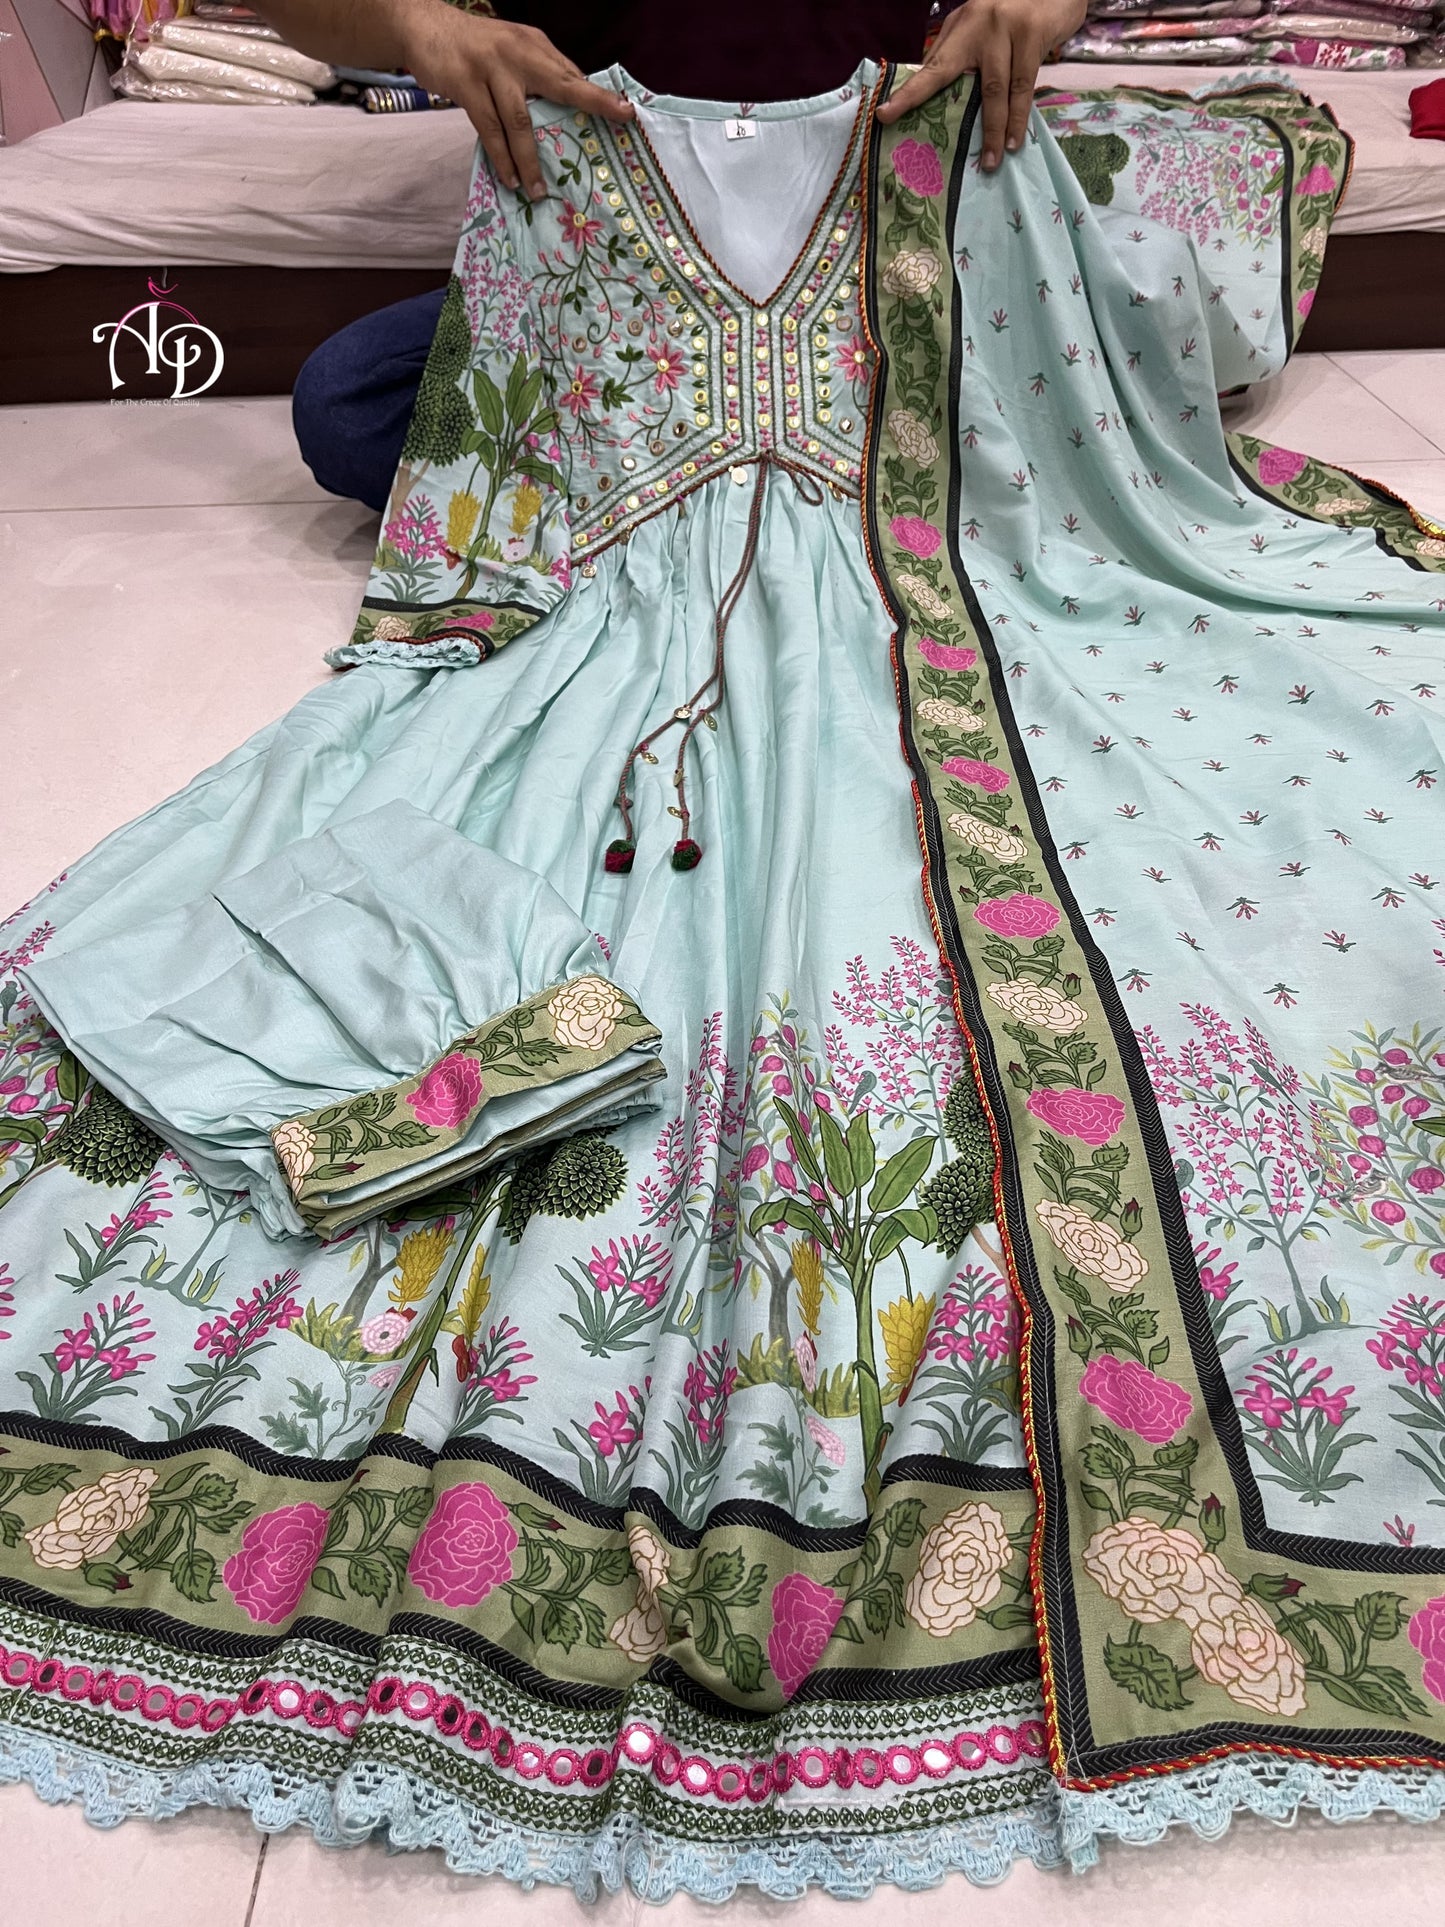 Beautiful Pink Muslin Alia Suit Set which is beautifully decorated with intricate hand embroidery, Zari weaving and digital prints. It is paired with matching pants and lace dupatta.